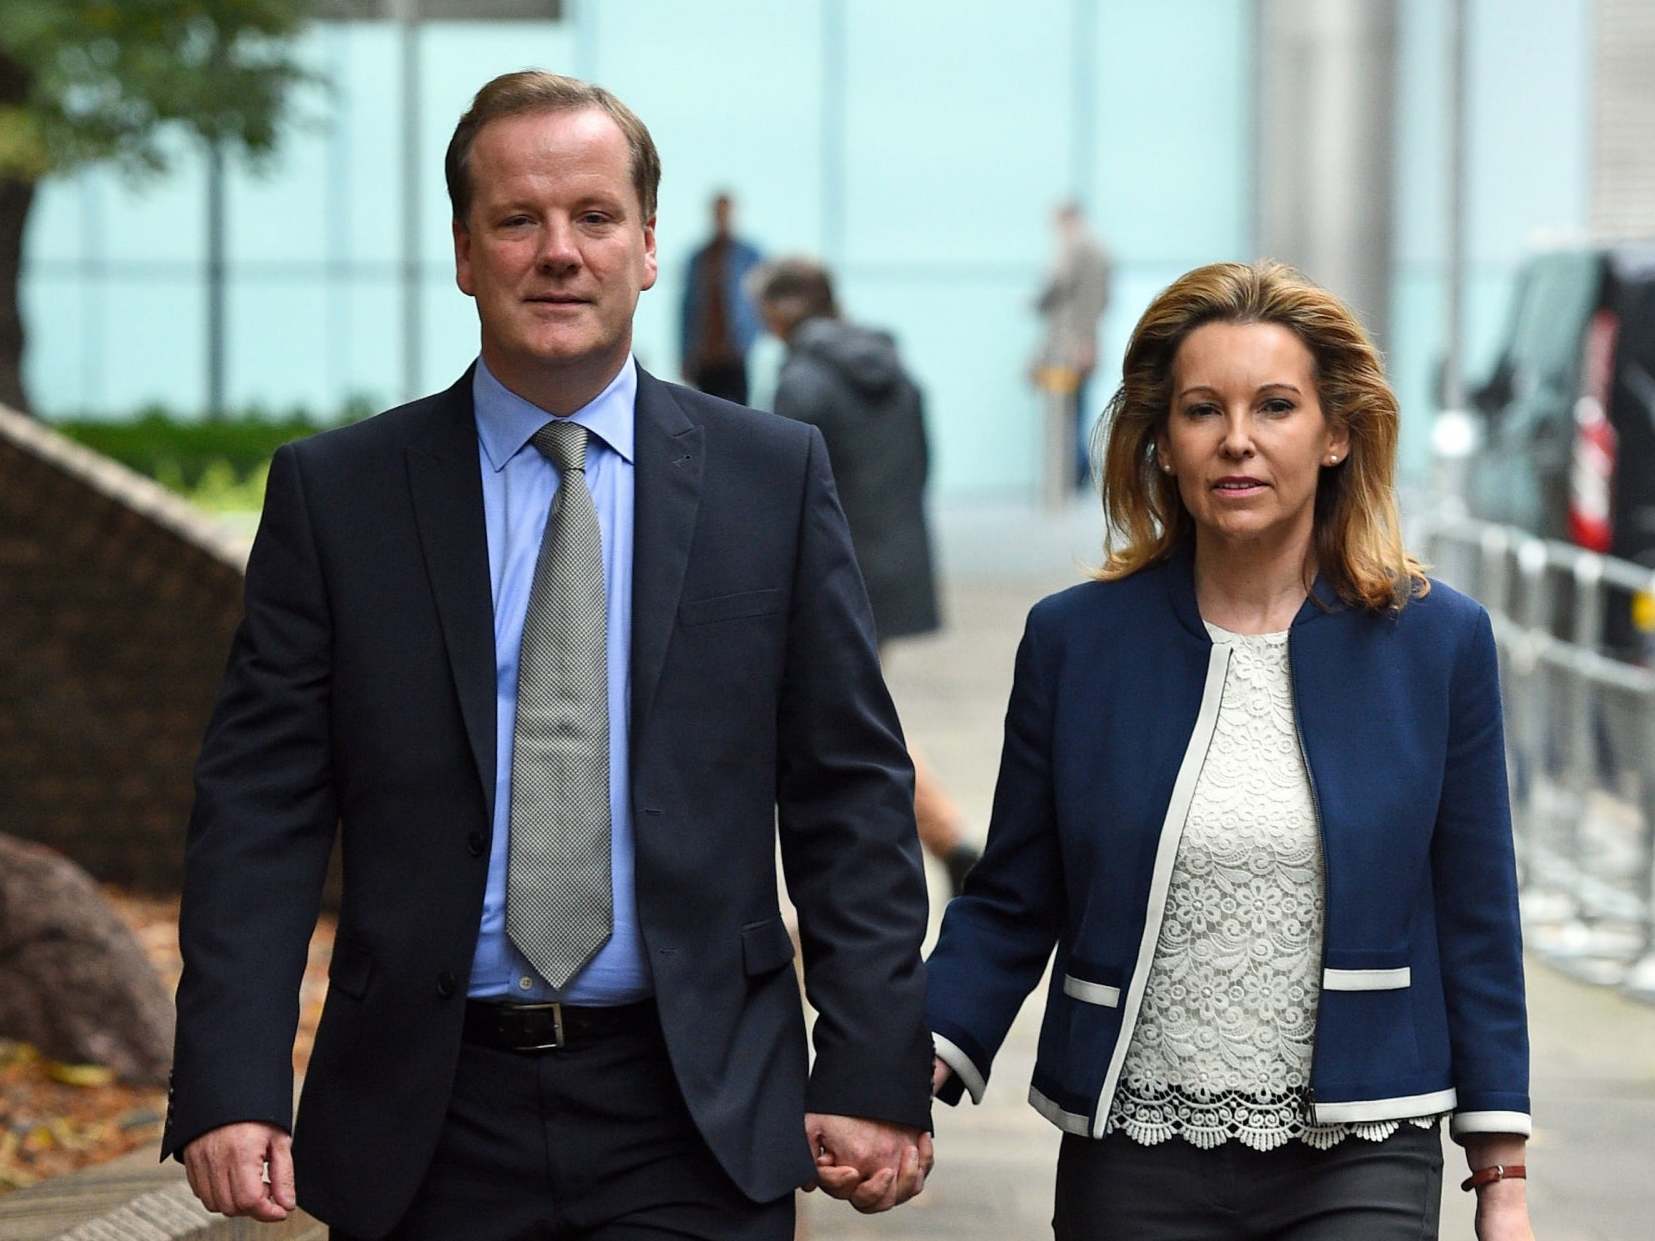 Charlie Elphicke: Tory candidate accused of sexual assault replaced by wife